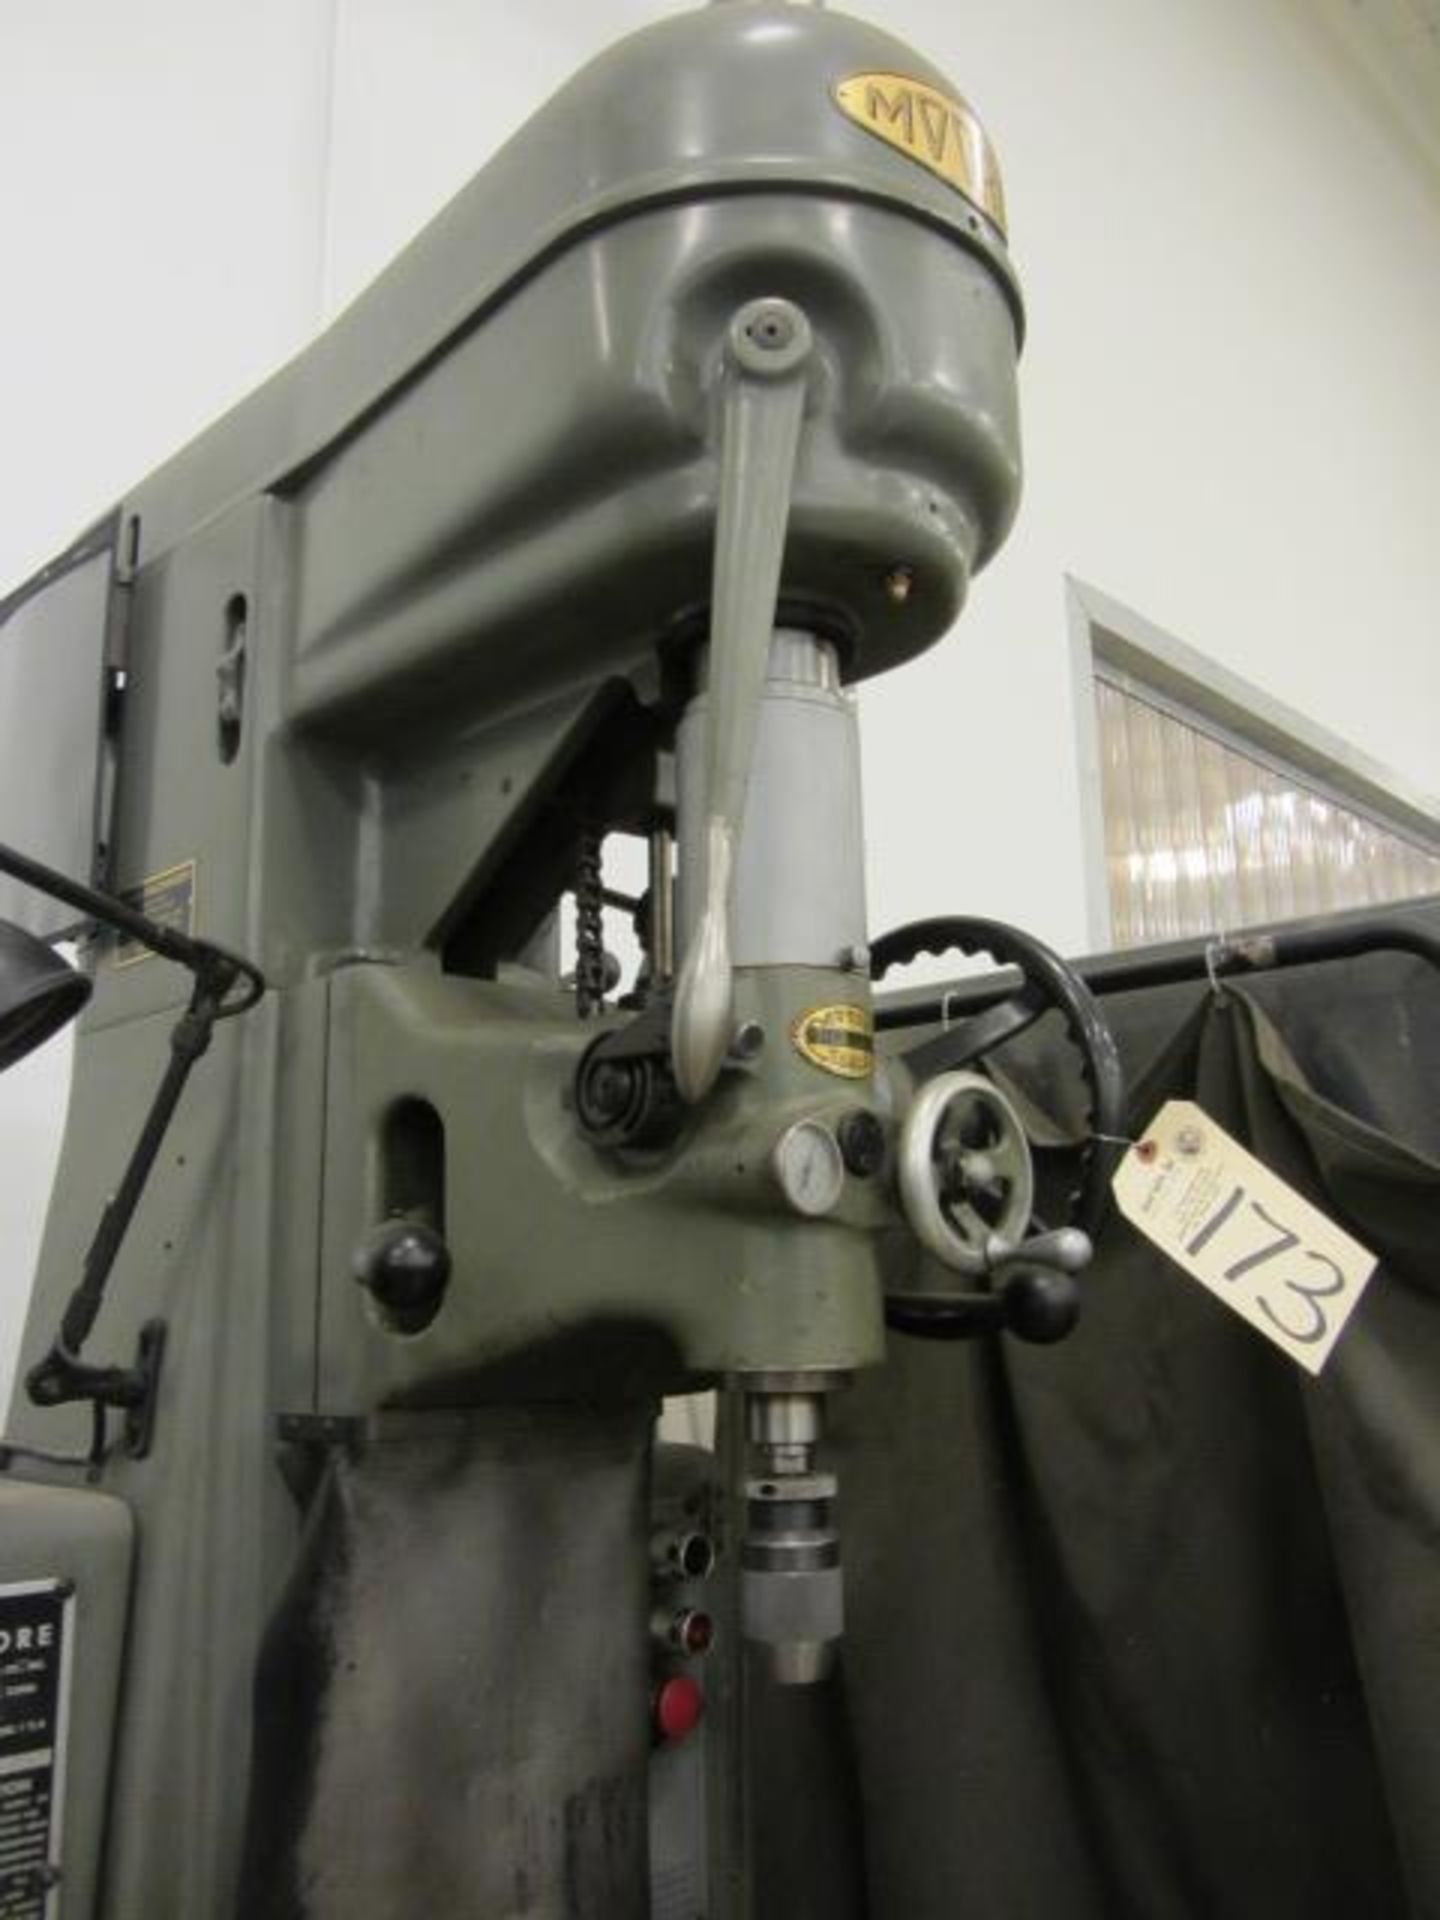 Moore 1-1/2B Jig Borer with 9'' x 14'' Travels, Adjustable Feed, Indicator, sn:J932 - Image 5 of 5